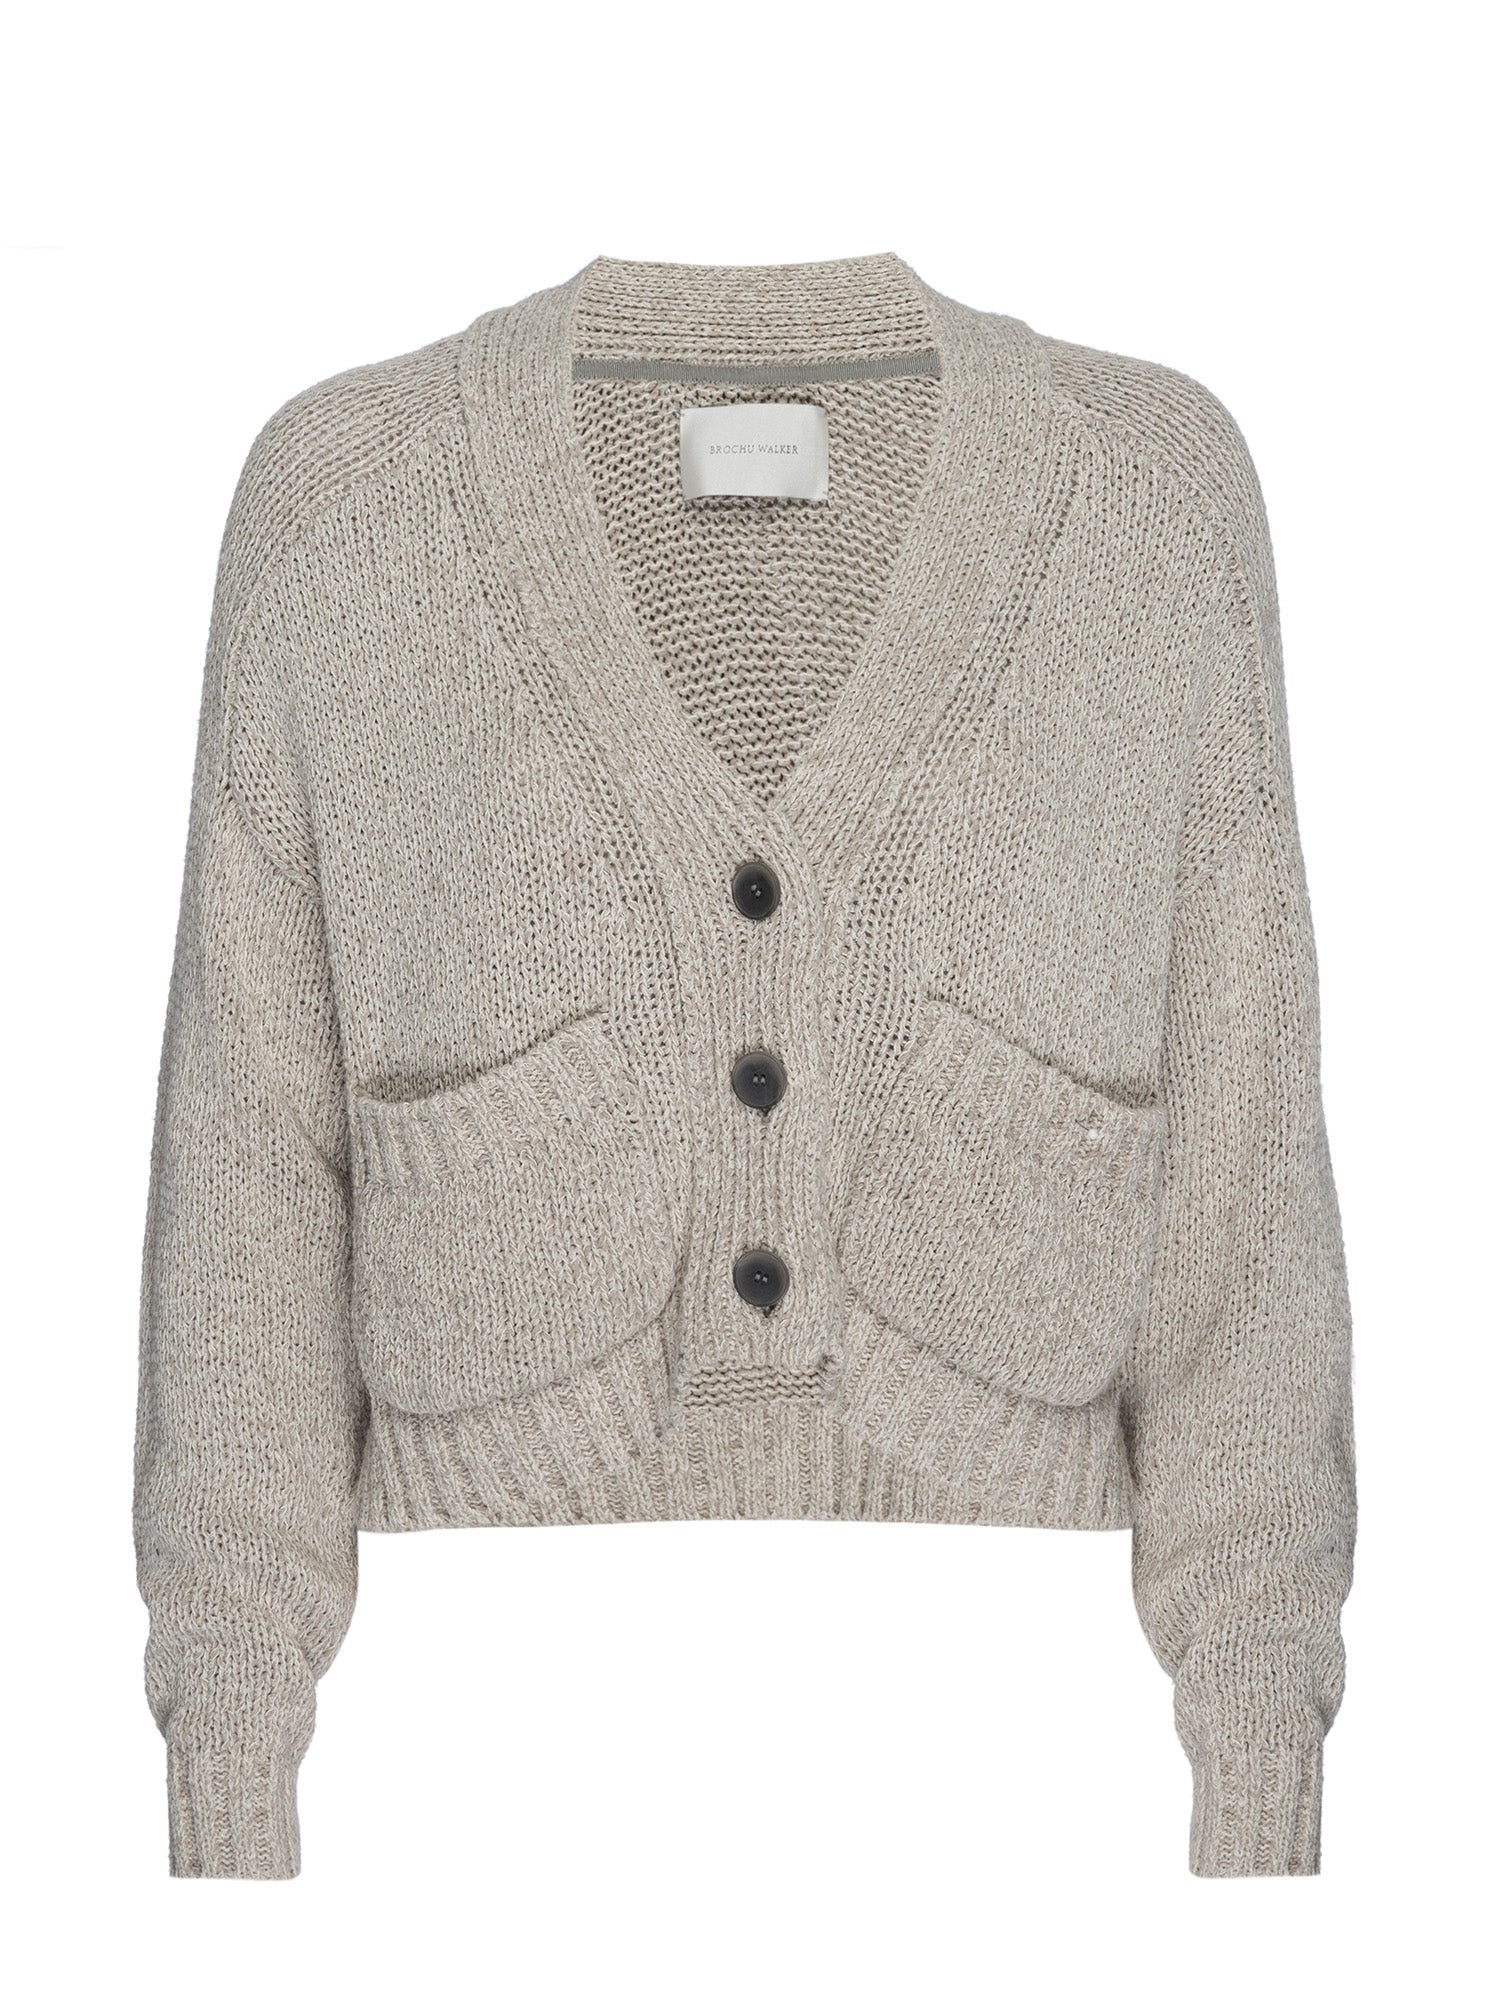 Cropped beige linen cotton cardigan sweater flat view